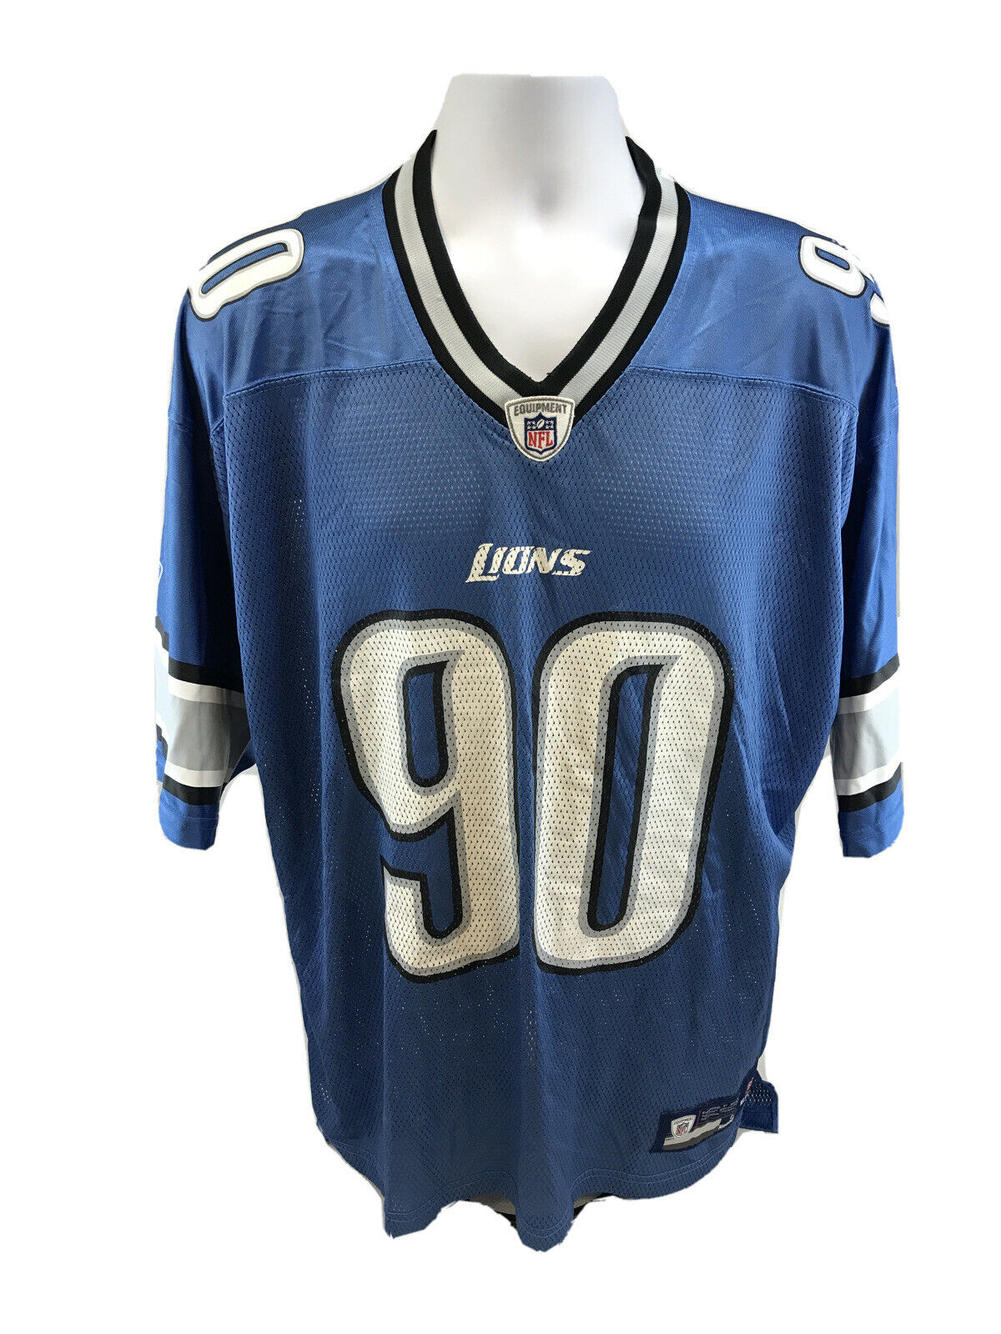 suh lions jersey